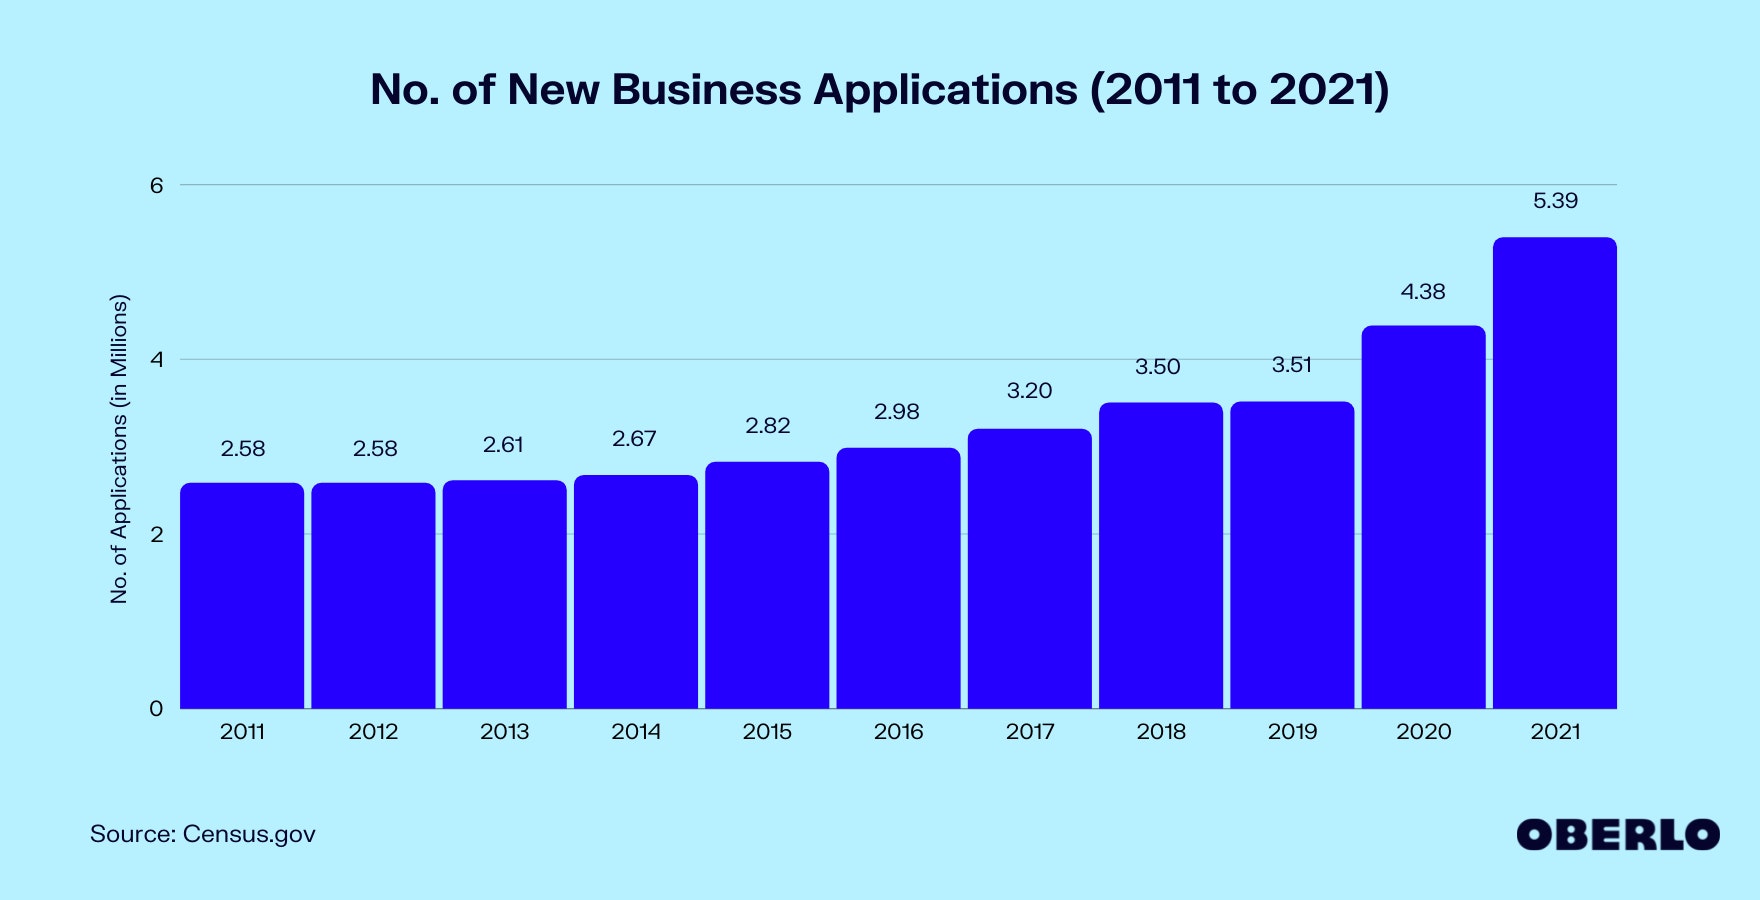 Chart of the no. of new business applications from 2011 to 2021